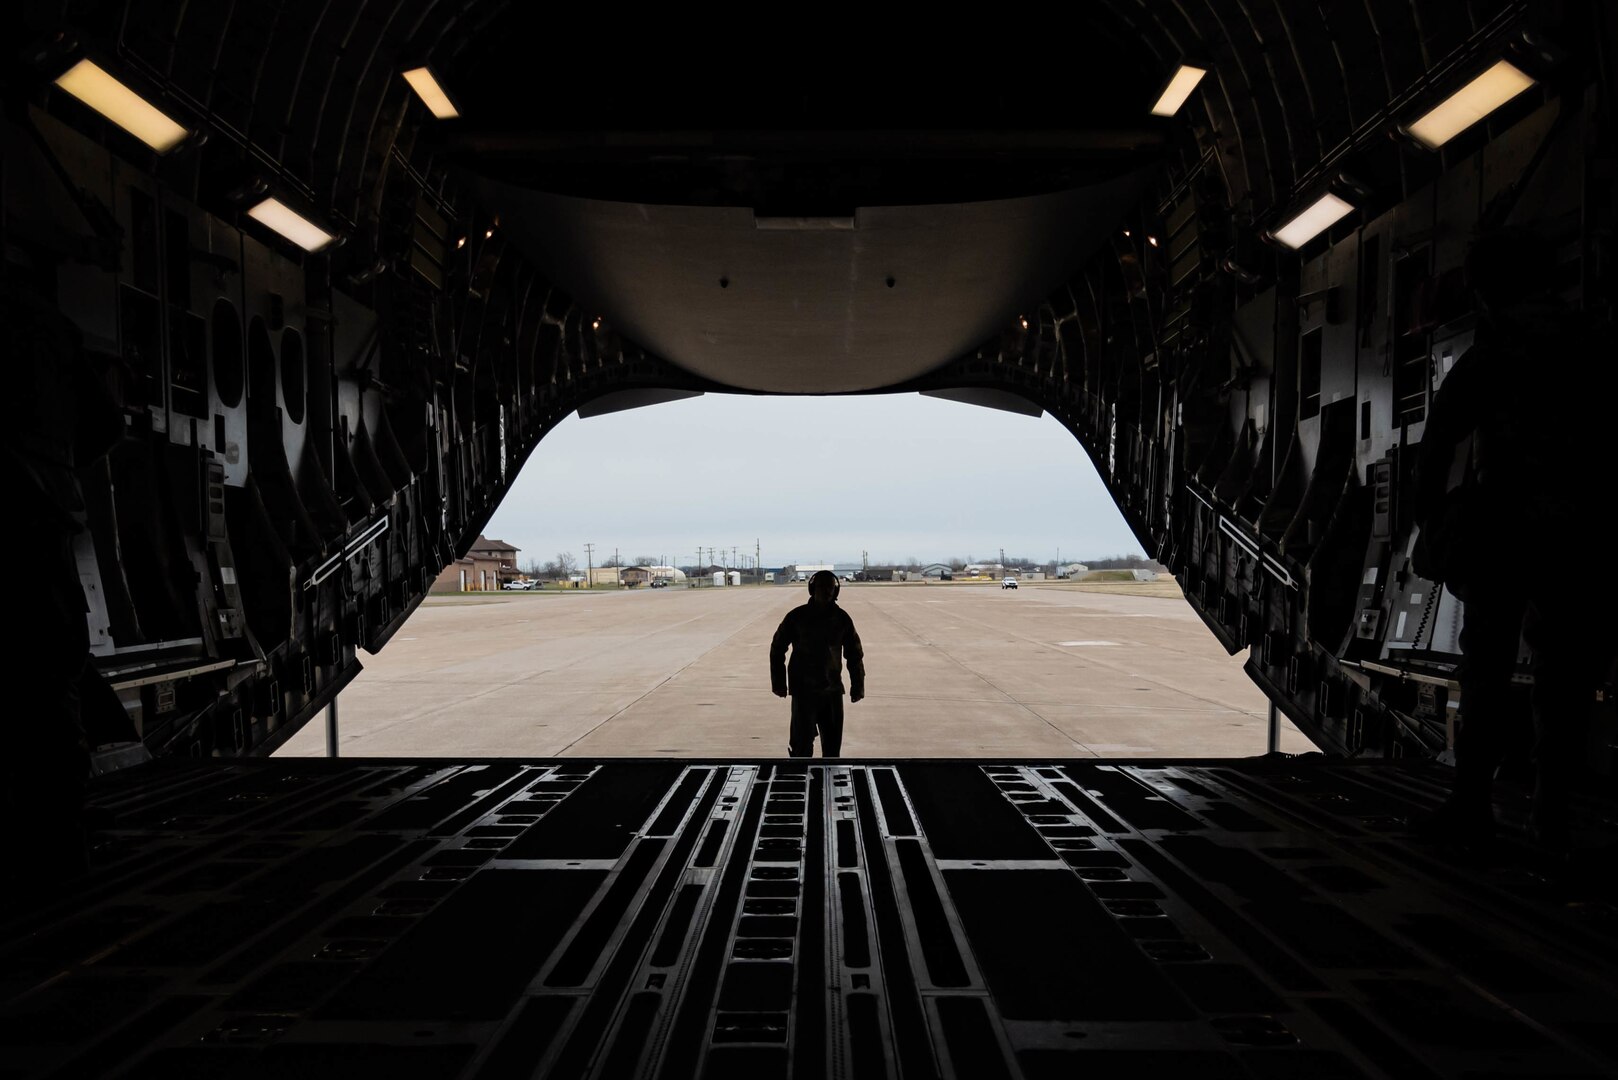 An Airman looks over a C-17 Globemaster III on its landing at Niagara Falls Air Reserve Station, Niagara Falls, New York, during a readiness exercise April 7, 2022. The exercise demonstrated the 107th Attack Wing’s capability to generate personnel and cargo under contested, degraded and operationally limited conditions.